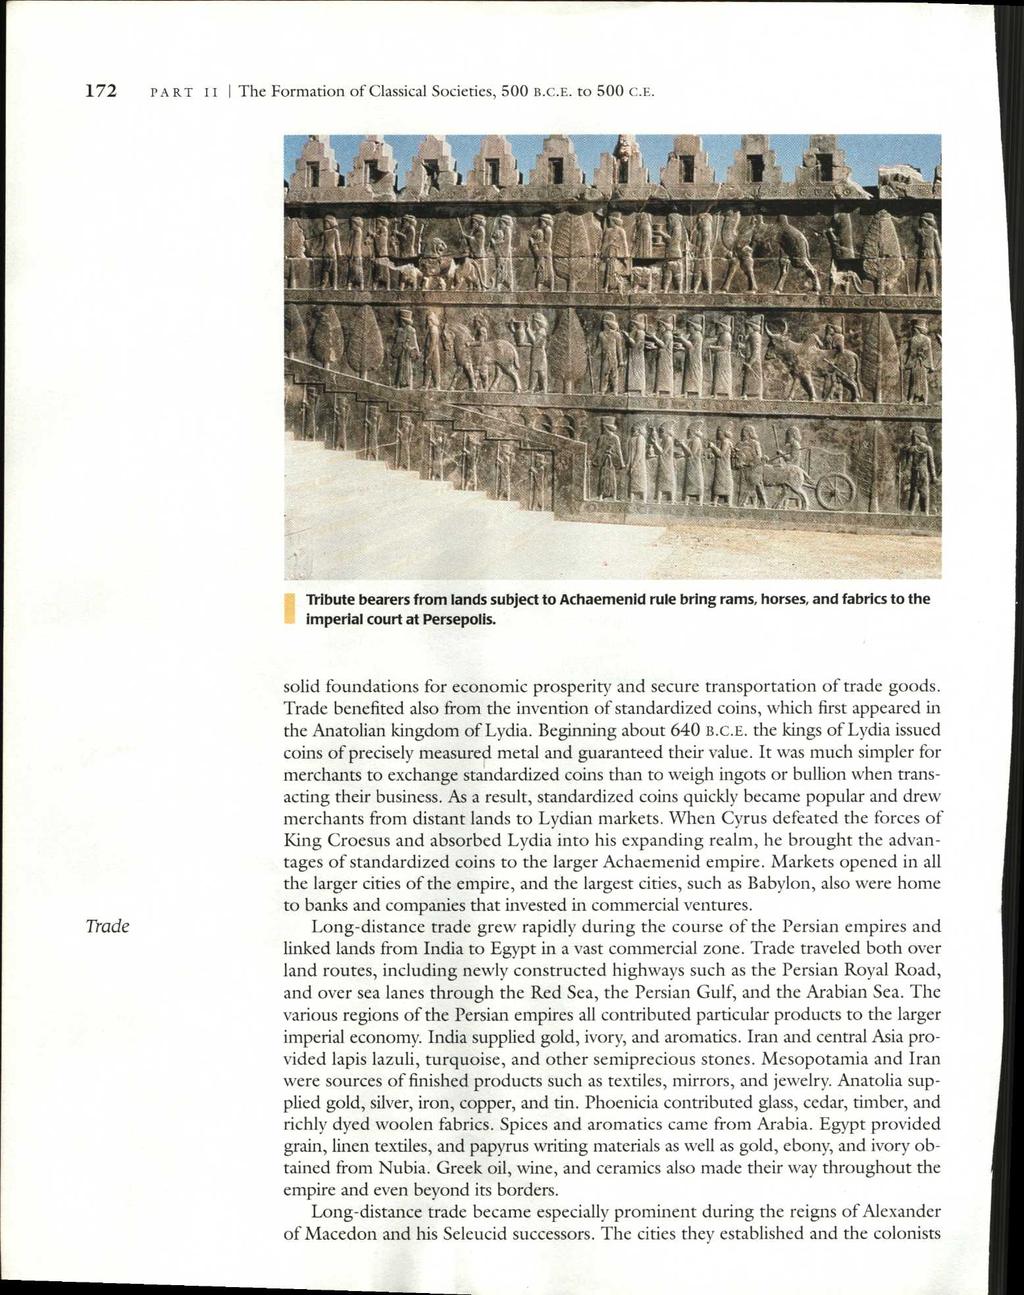 172 PA RT I I I The Formation of Classical Societies, 500 B.C.E. to 500 C.E. Tribute bearers from lands subject to Achaemenid rule bring rams, horses, and fabrics to the imperial court at Persepolis.